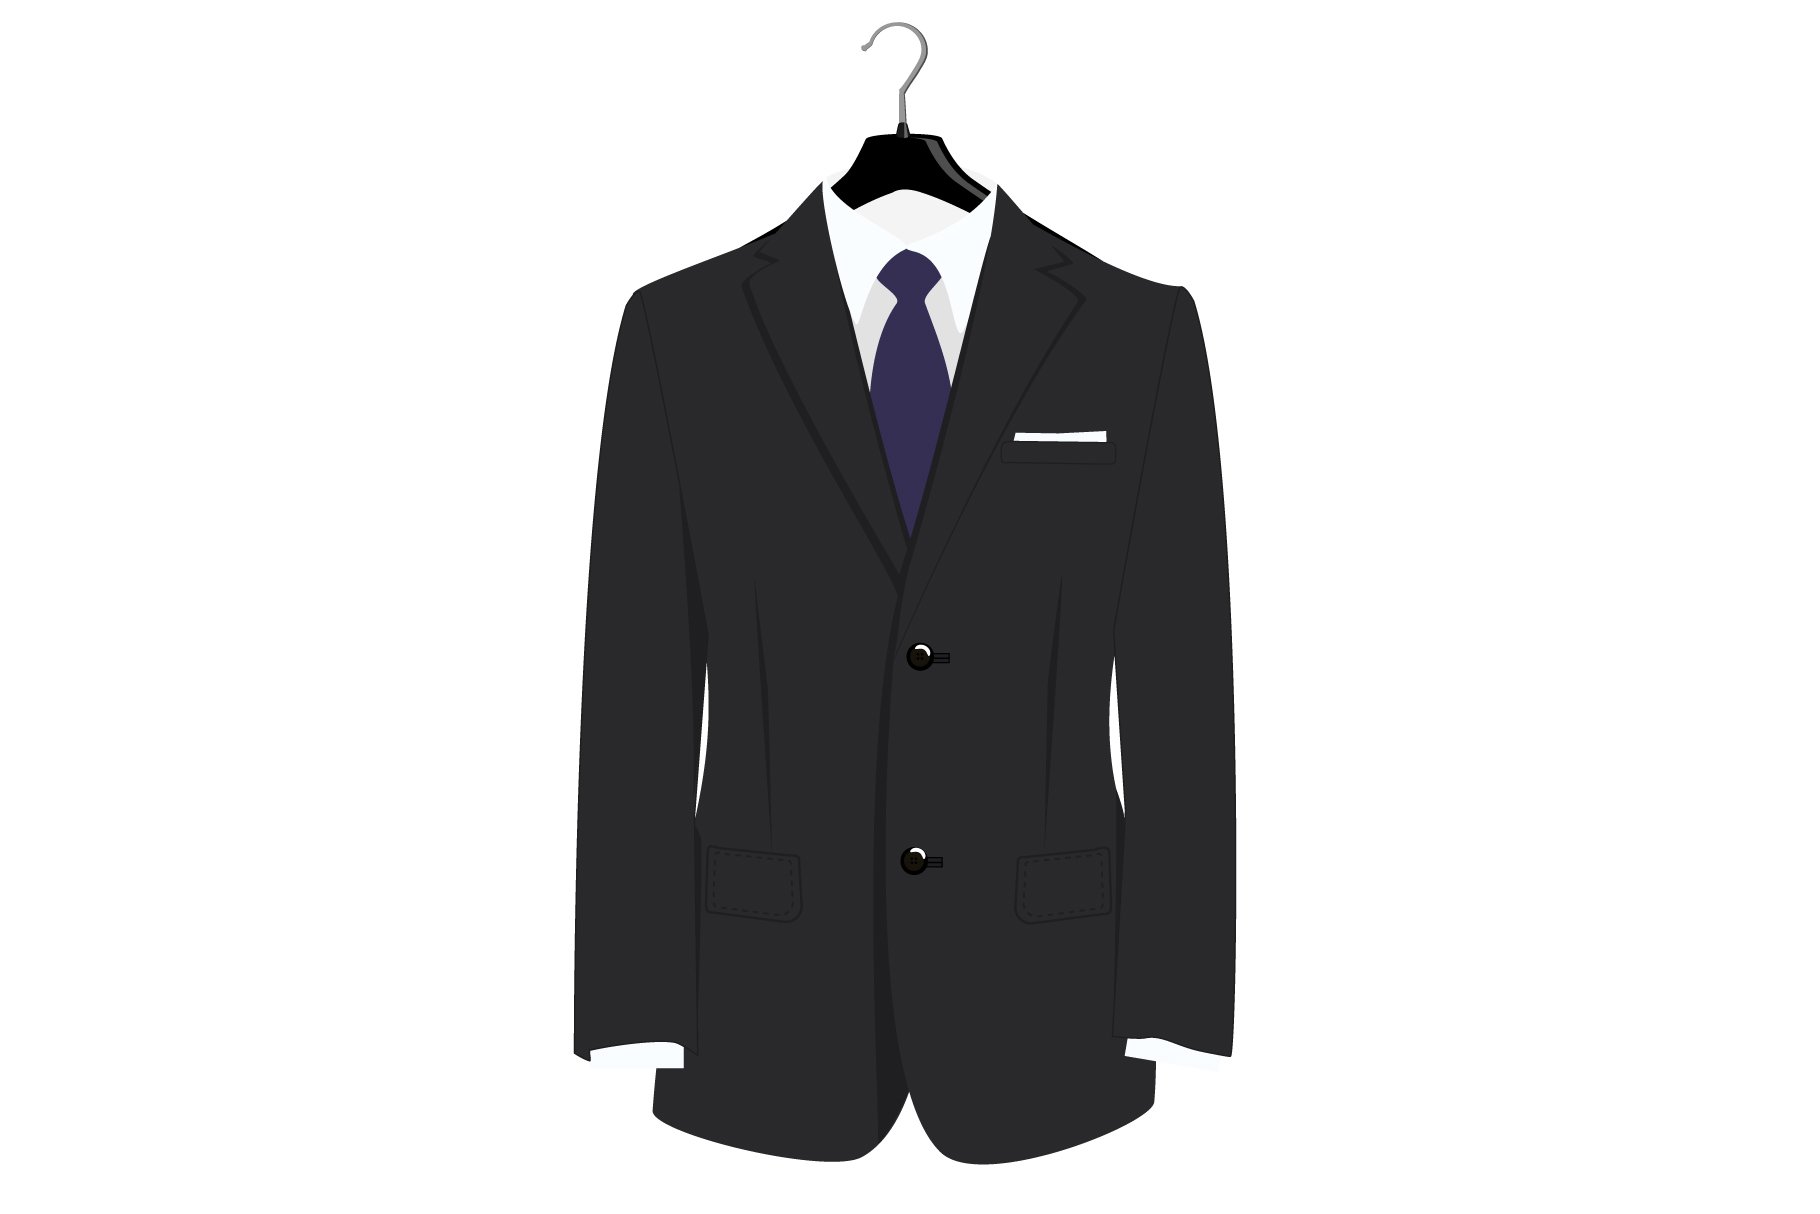 Man classical black suit on hanger cover image.